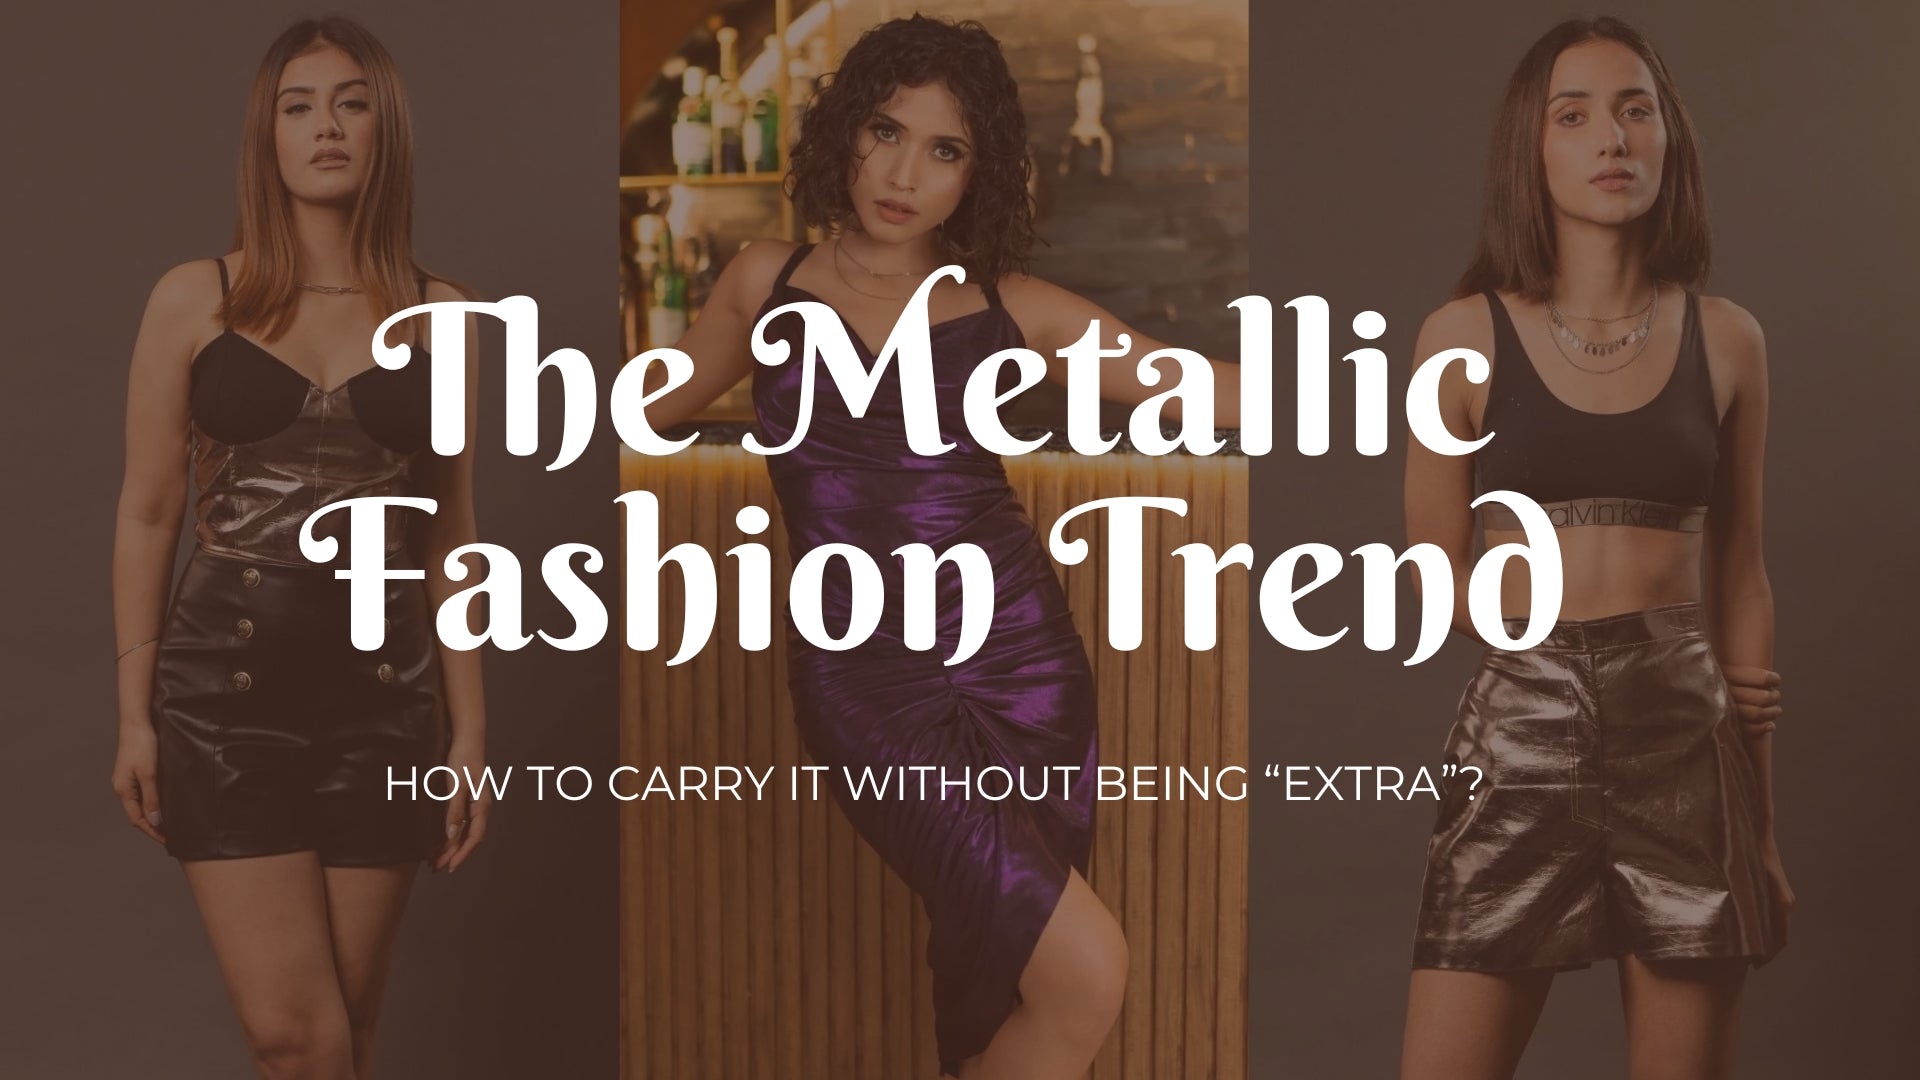 Metallic Is the Shiny New Fashion Trend We Need in Our Closet